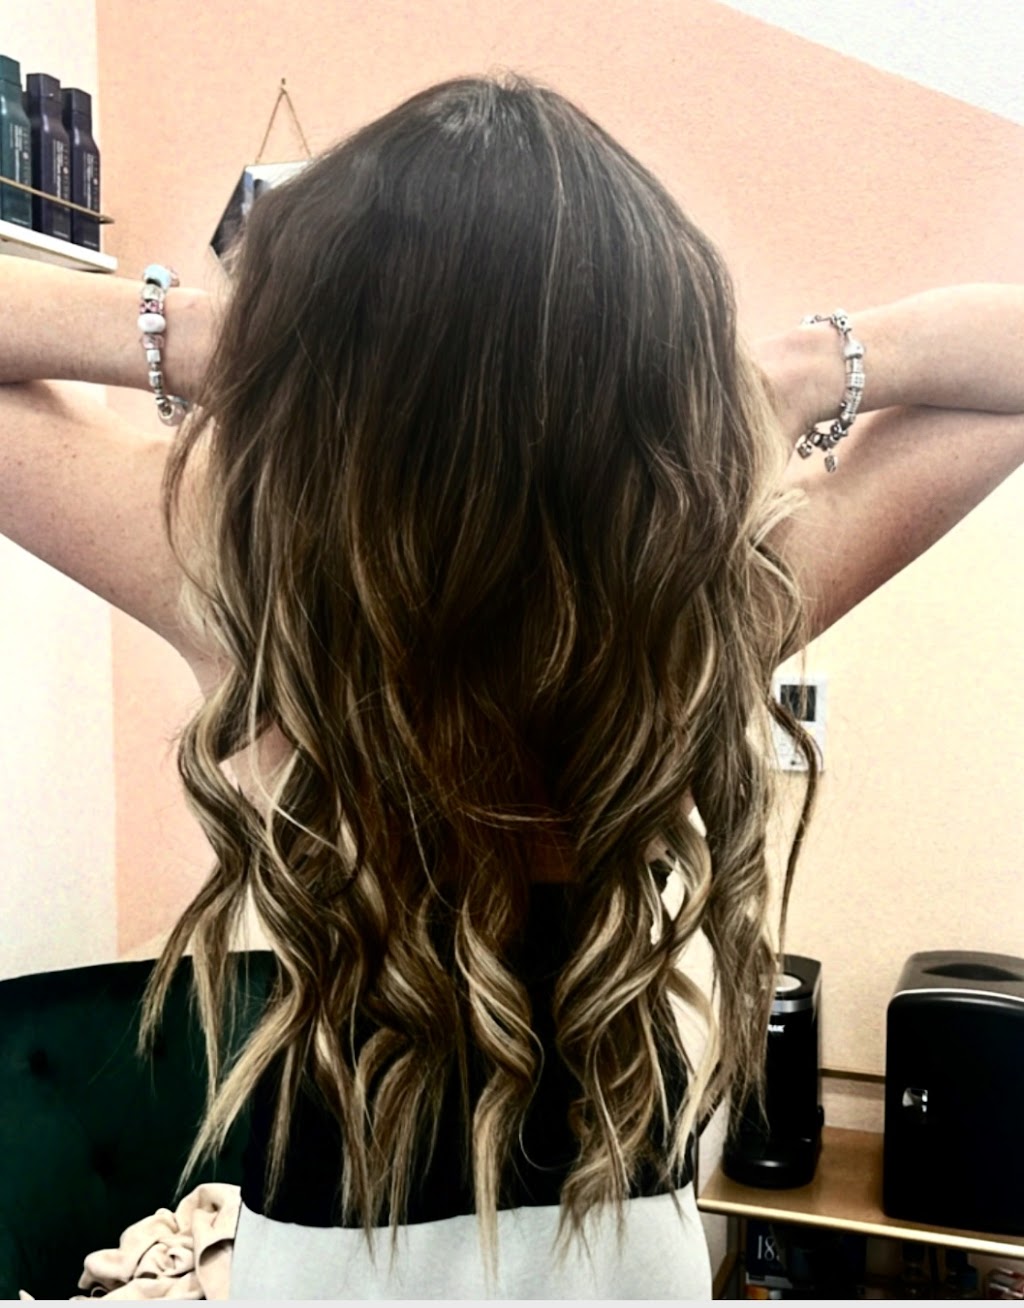 Styled x Melissa: Extension Specialist | 380 W Arrow Hwy #128, Claremont, CA 91711, USA | Phone: (909) 870-5520